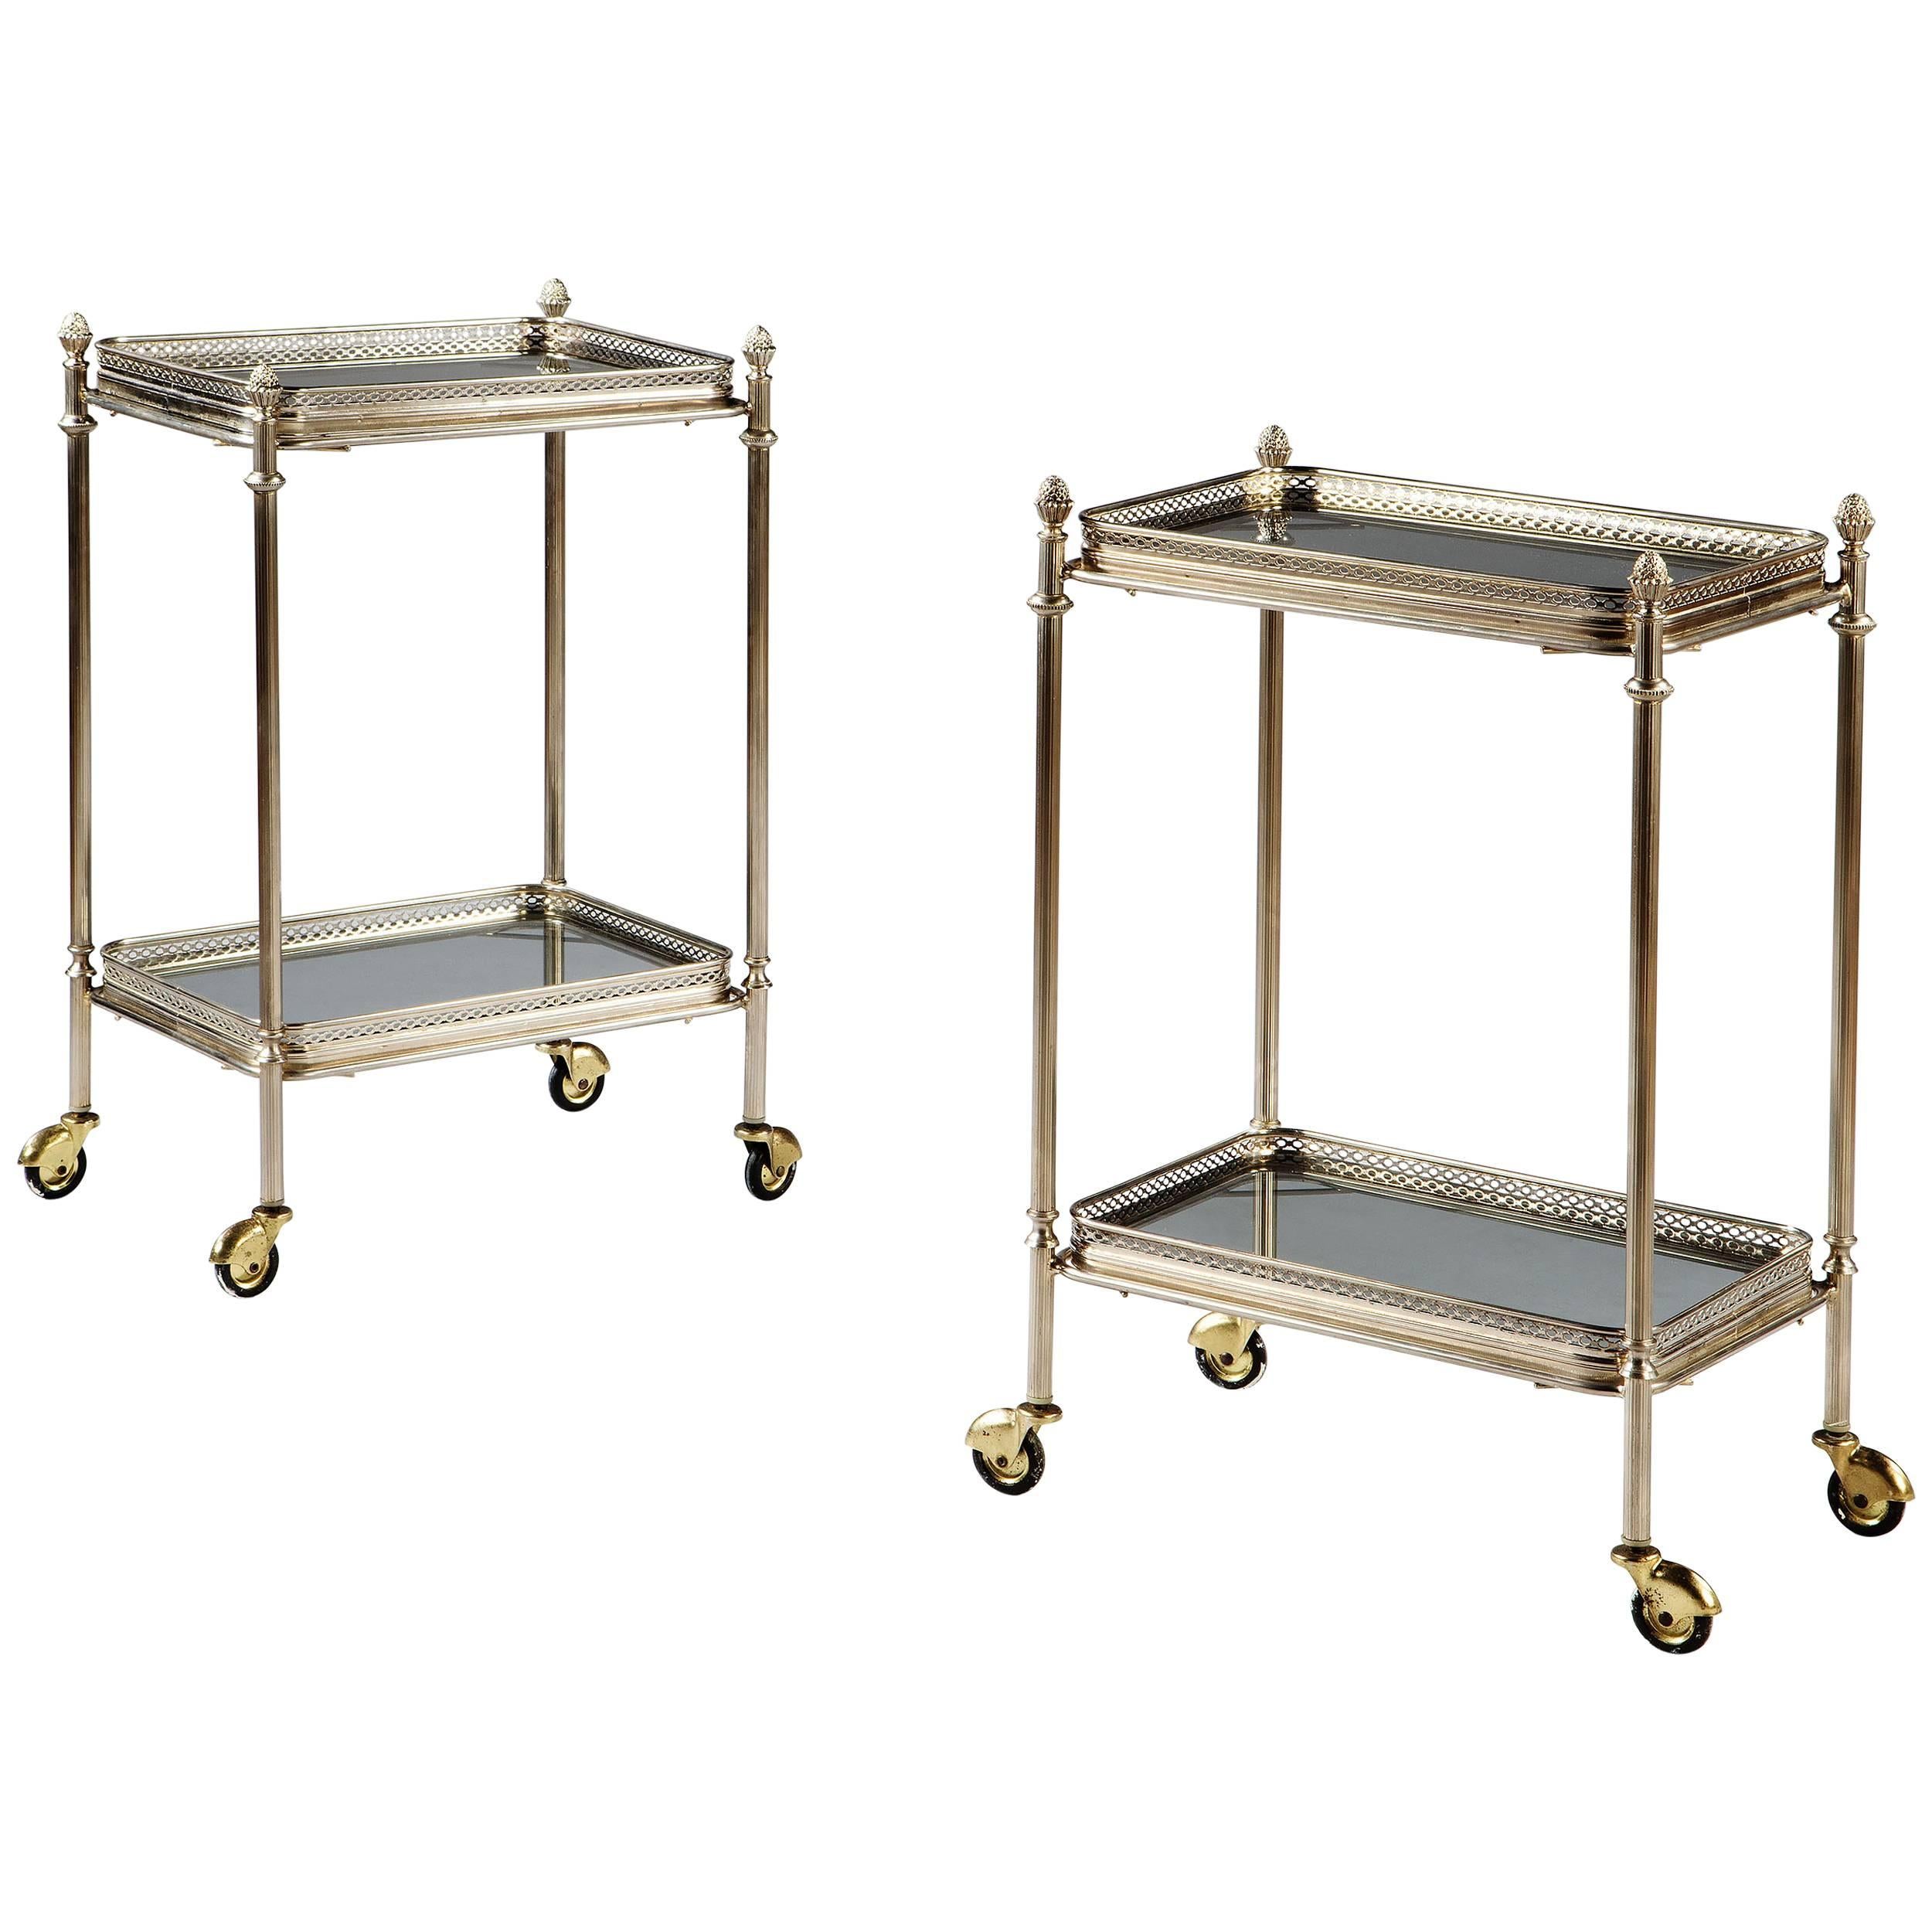 Pair of Nickel-Plated Mid-Century Modern Two-Tier Tables